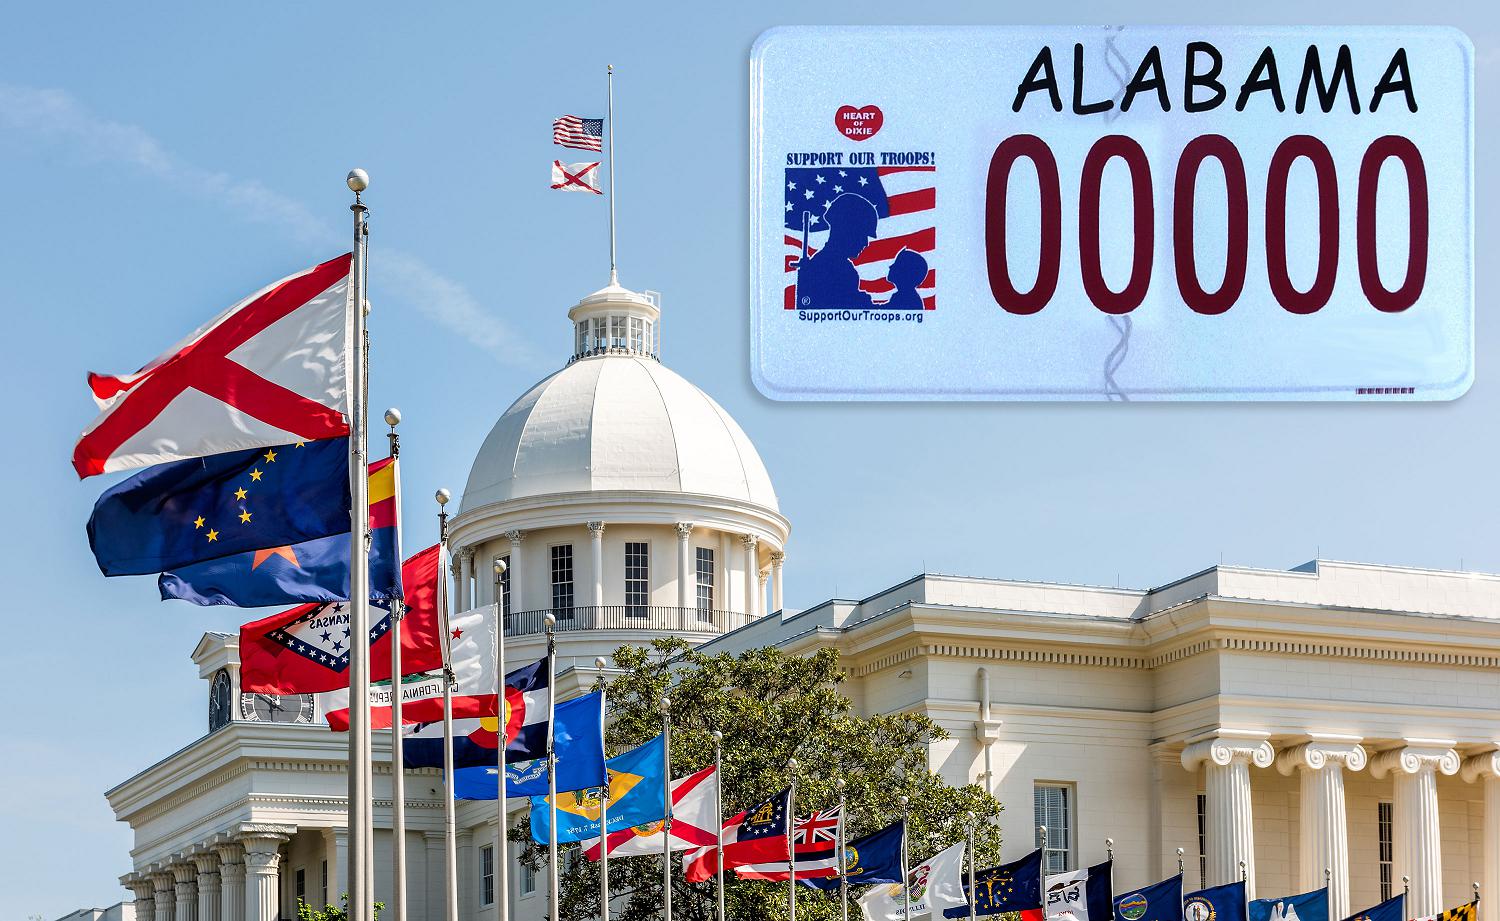 Alabama Capital Support our troops Servicemembers, military, active duty, deployed, troops, alabama, legislature, special license plate, care packages, care goods, southern strategy group, logan gray